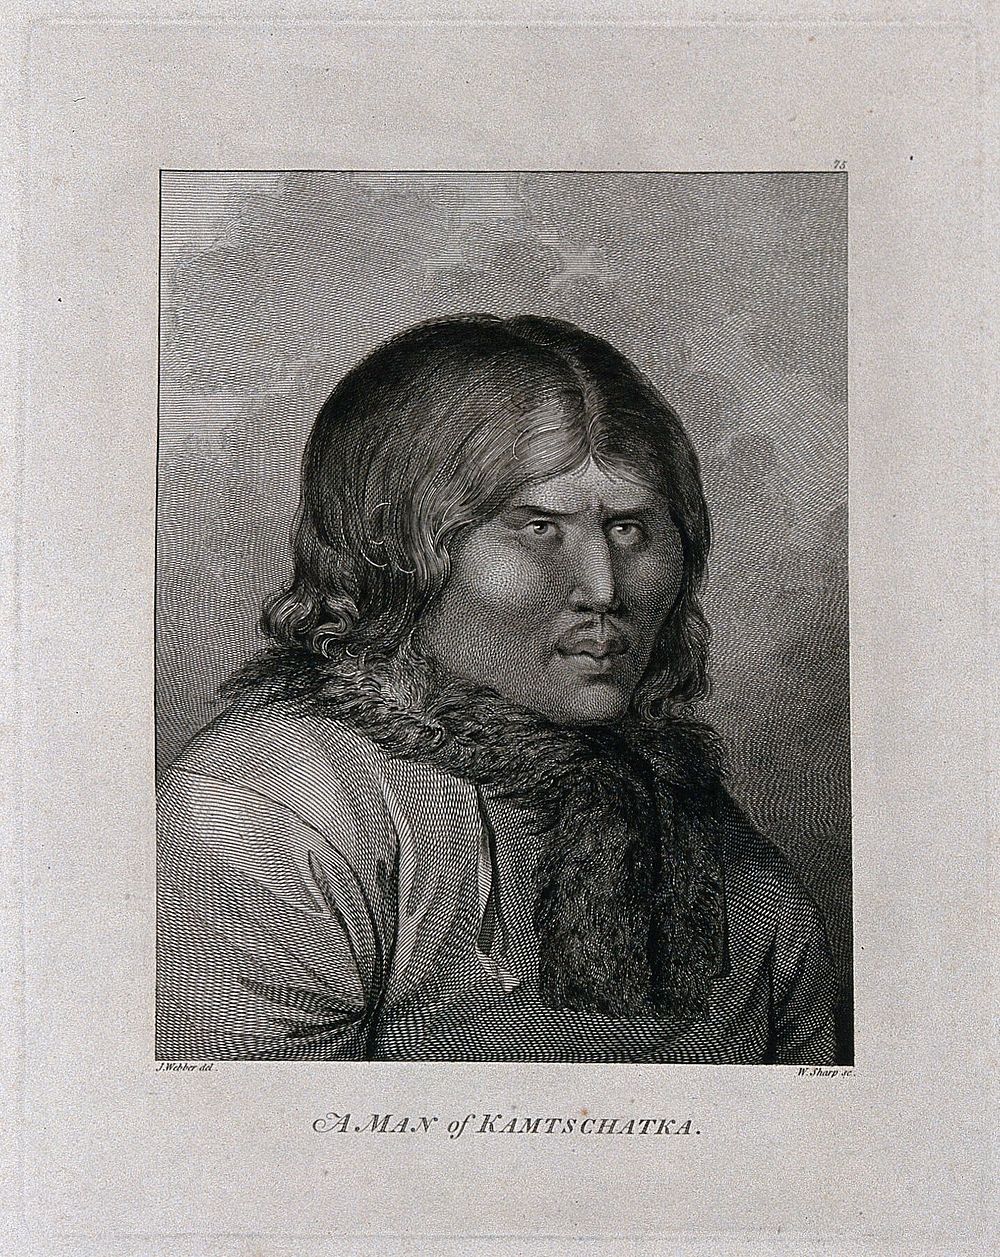 A man from Kamchatka. Engraving by W. Sharp, 1784, after J. Webber.